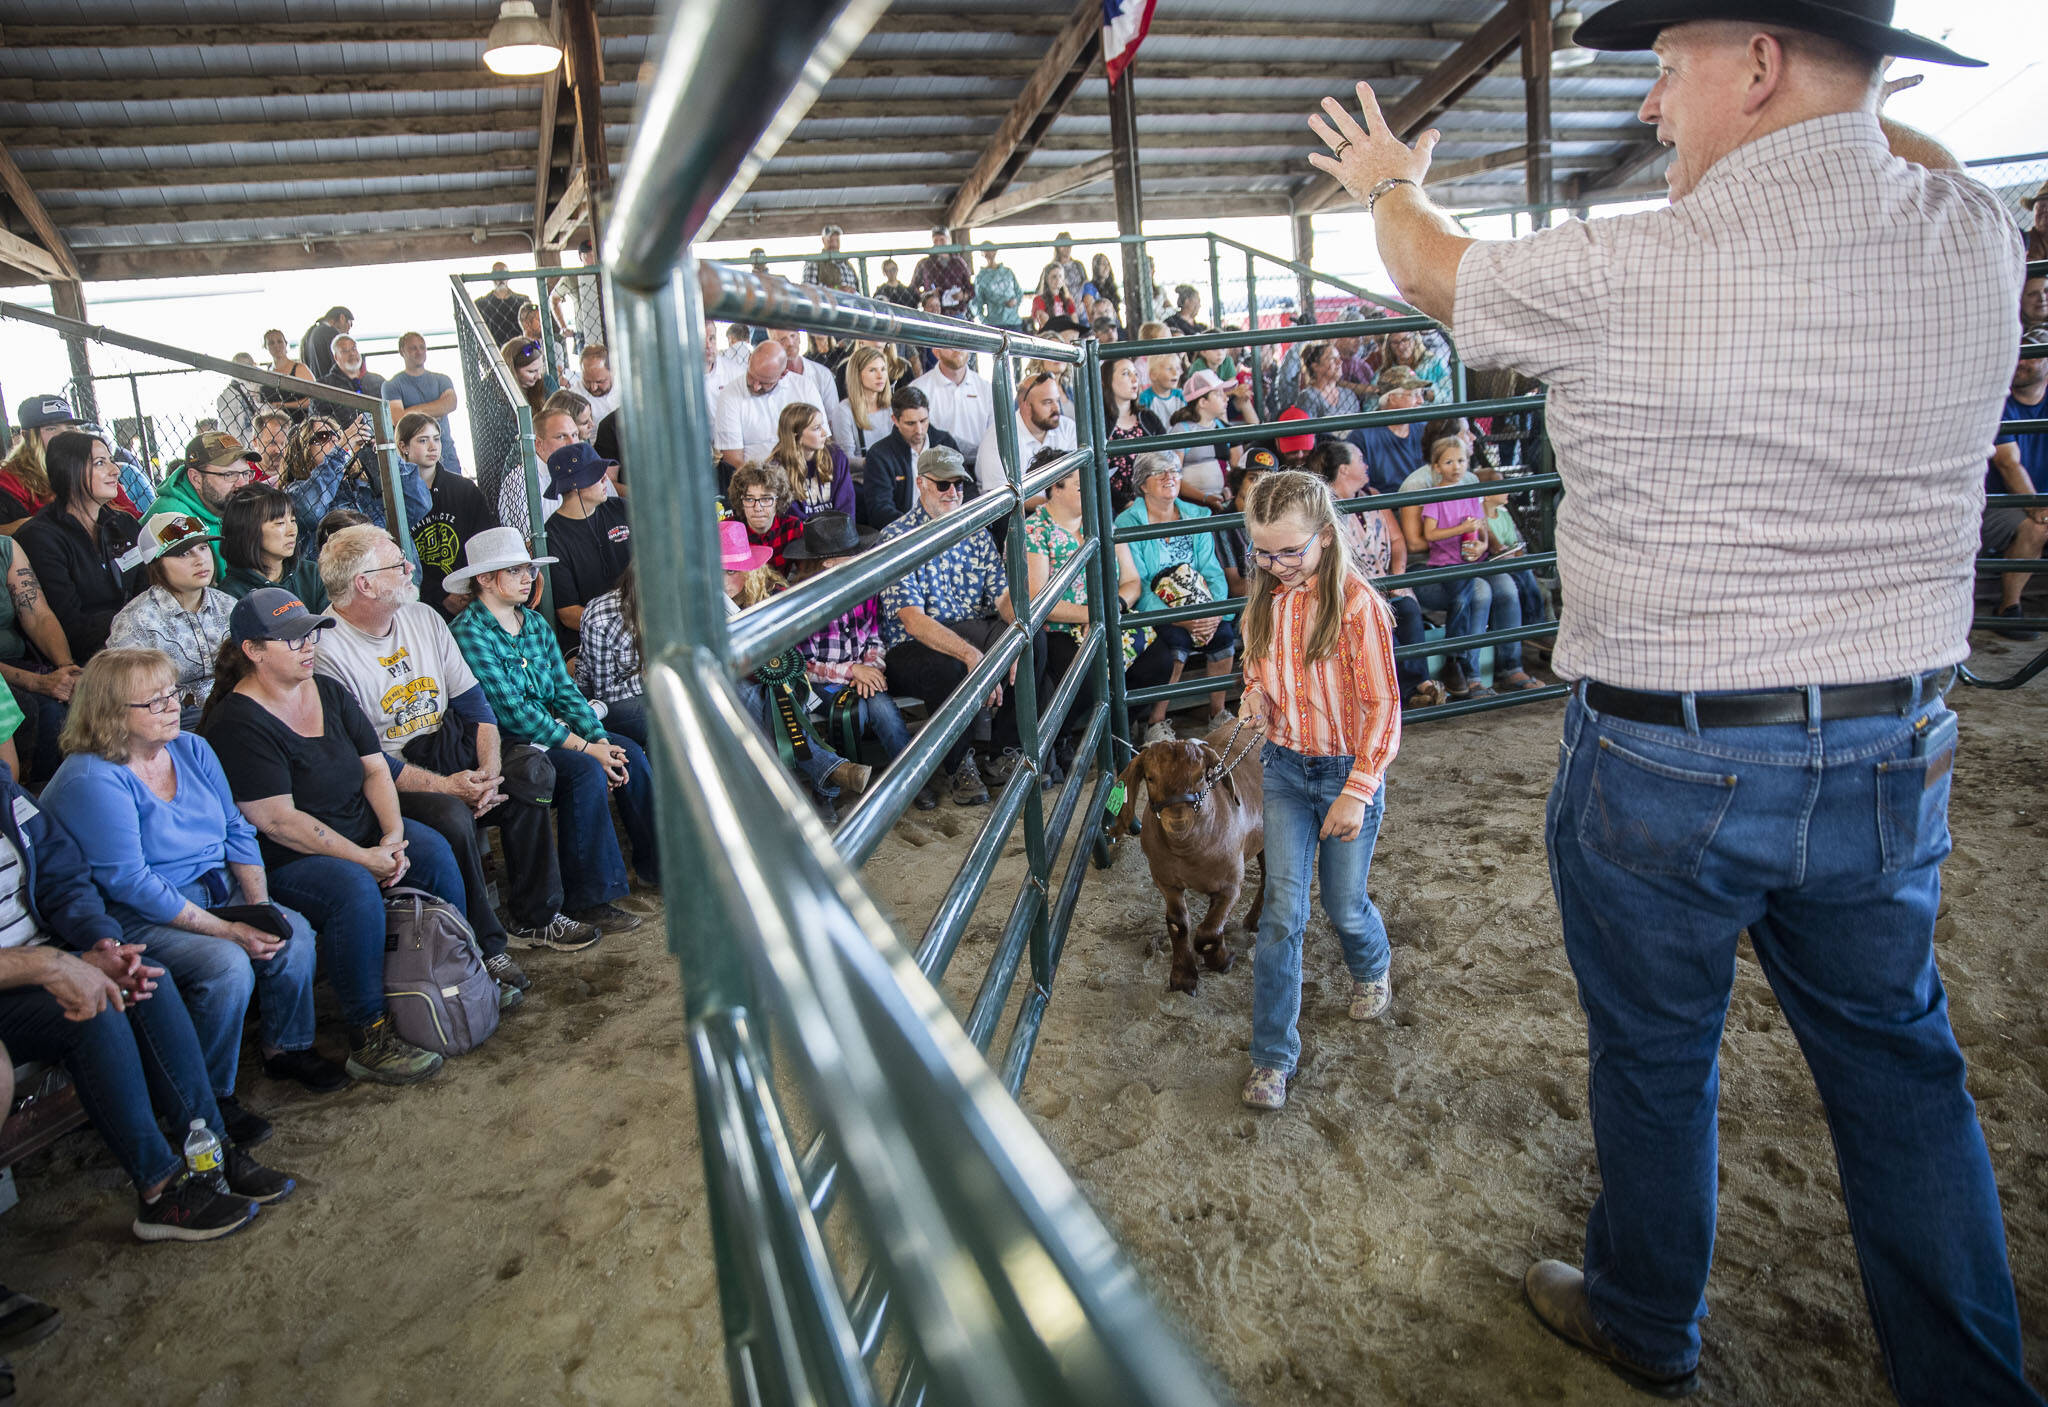 Kinsley Huscusson, 10, leads her goat Peaches around the arena during the Evergreen Youth Livestock Show at the Evergreen State Fair on Saturday, in Monroe. (Olivia Vanni / The Herald)